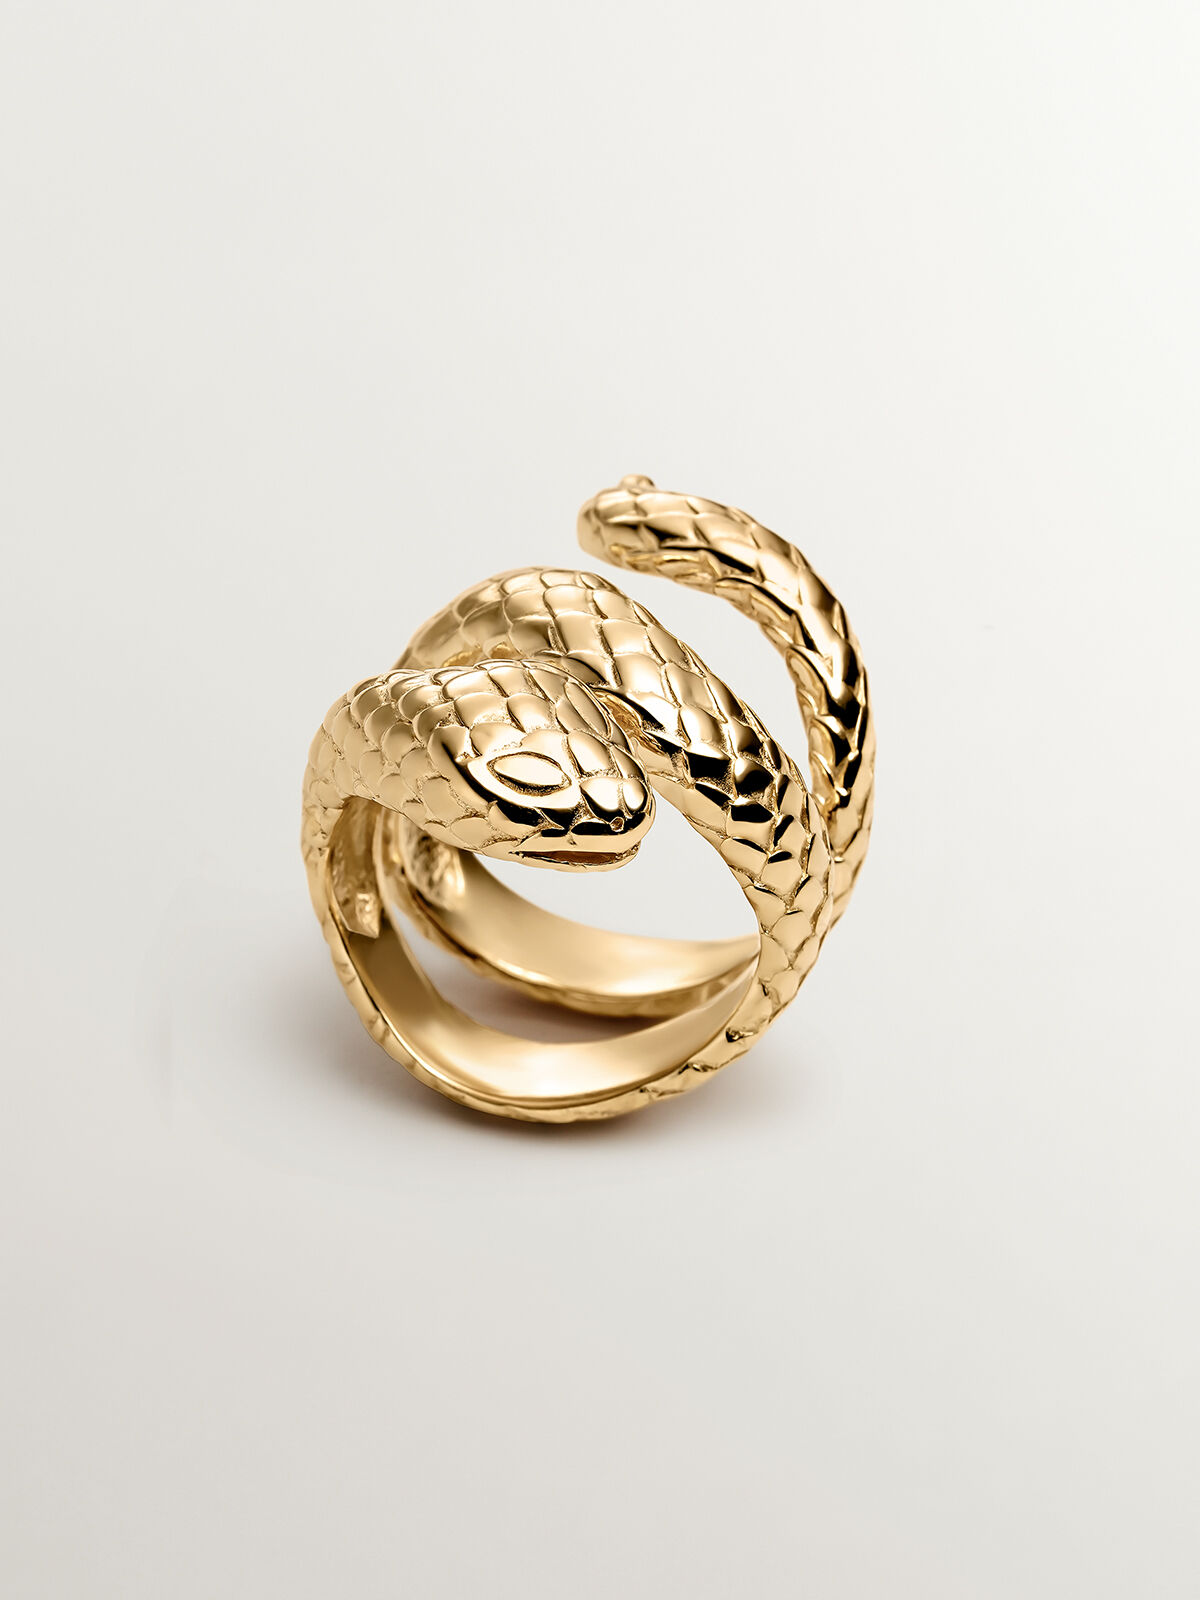 Wide 925 silver ring bathed in 18K yellow gold in the shape of a 